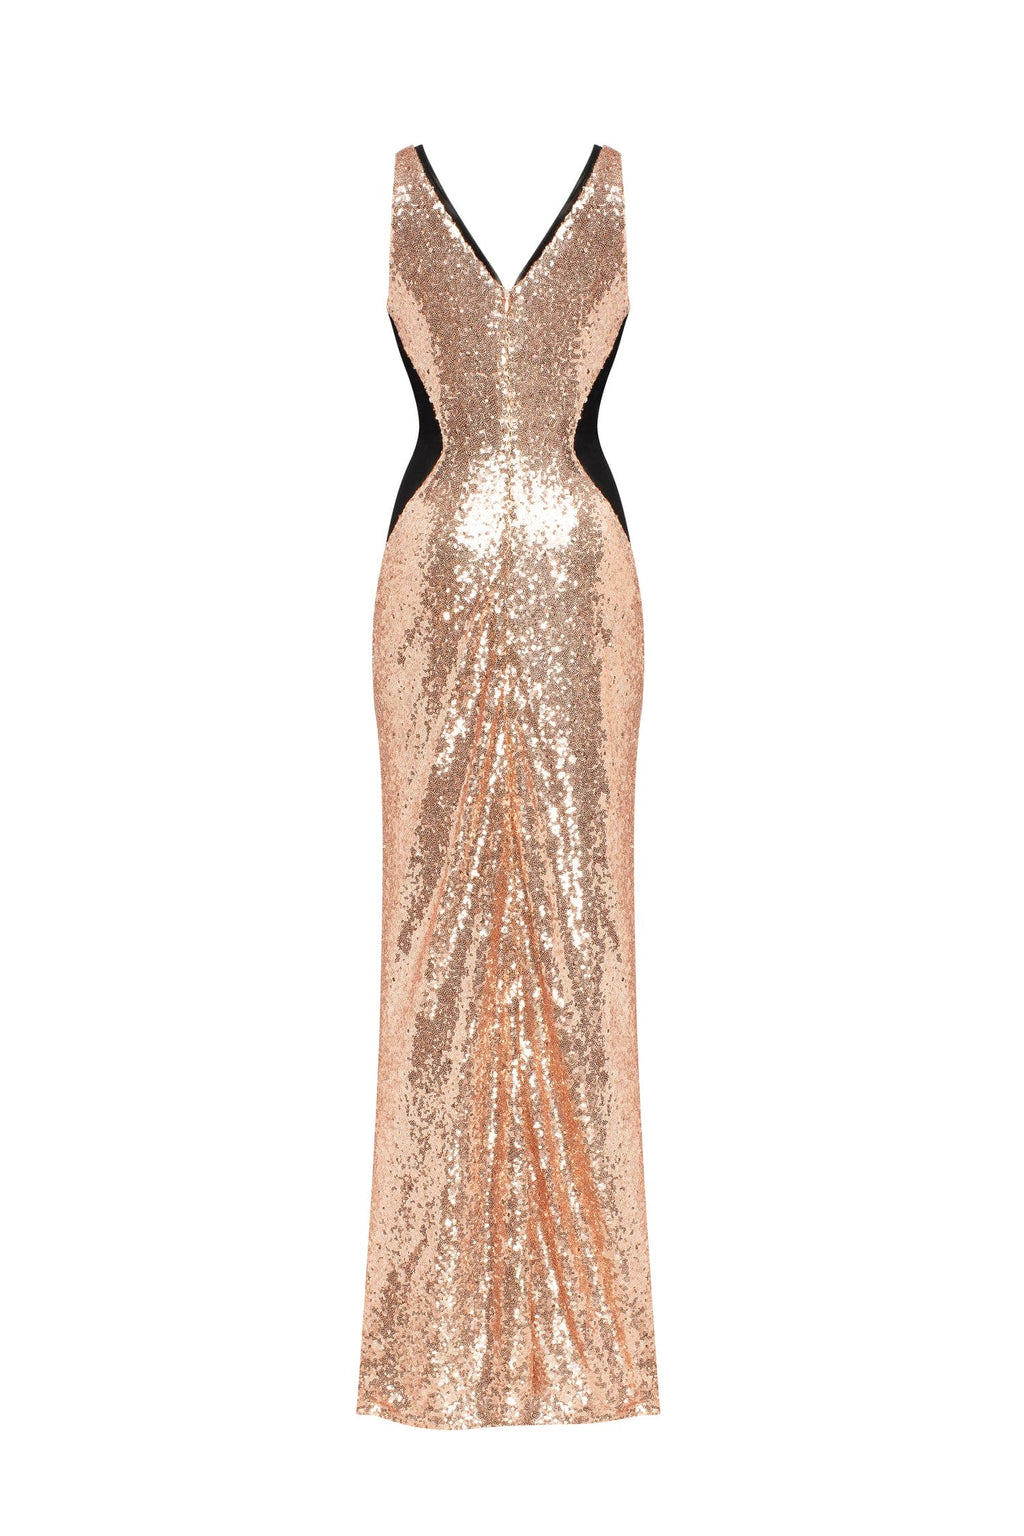 Extravaganza fully sequined gold maxi dress